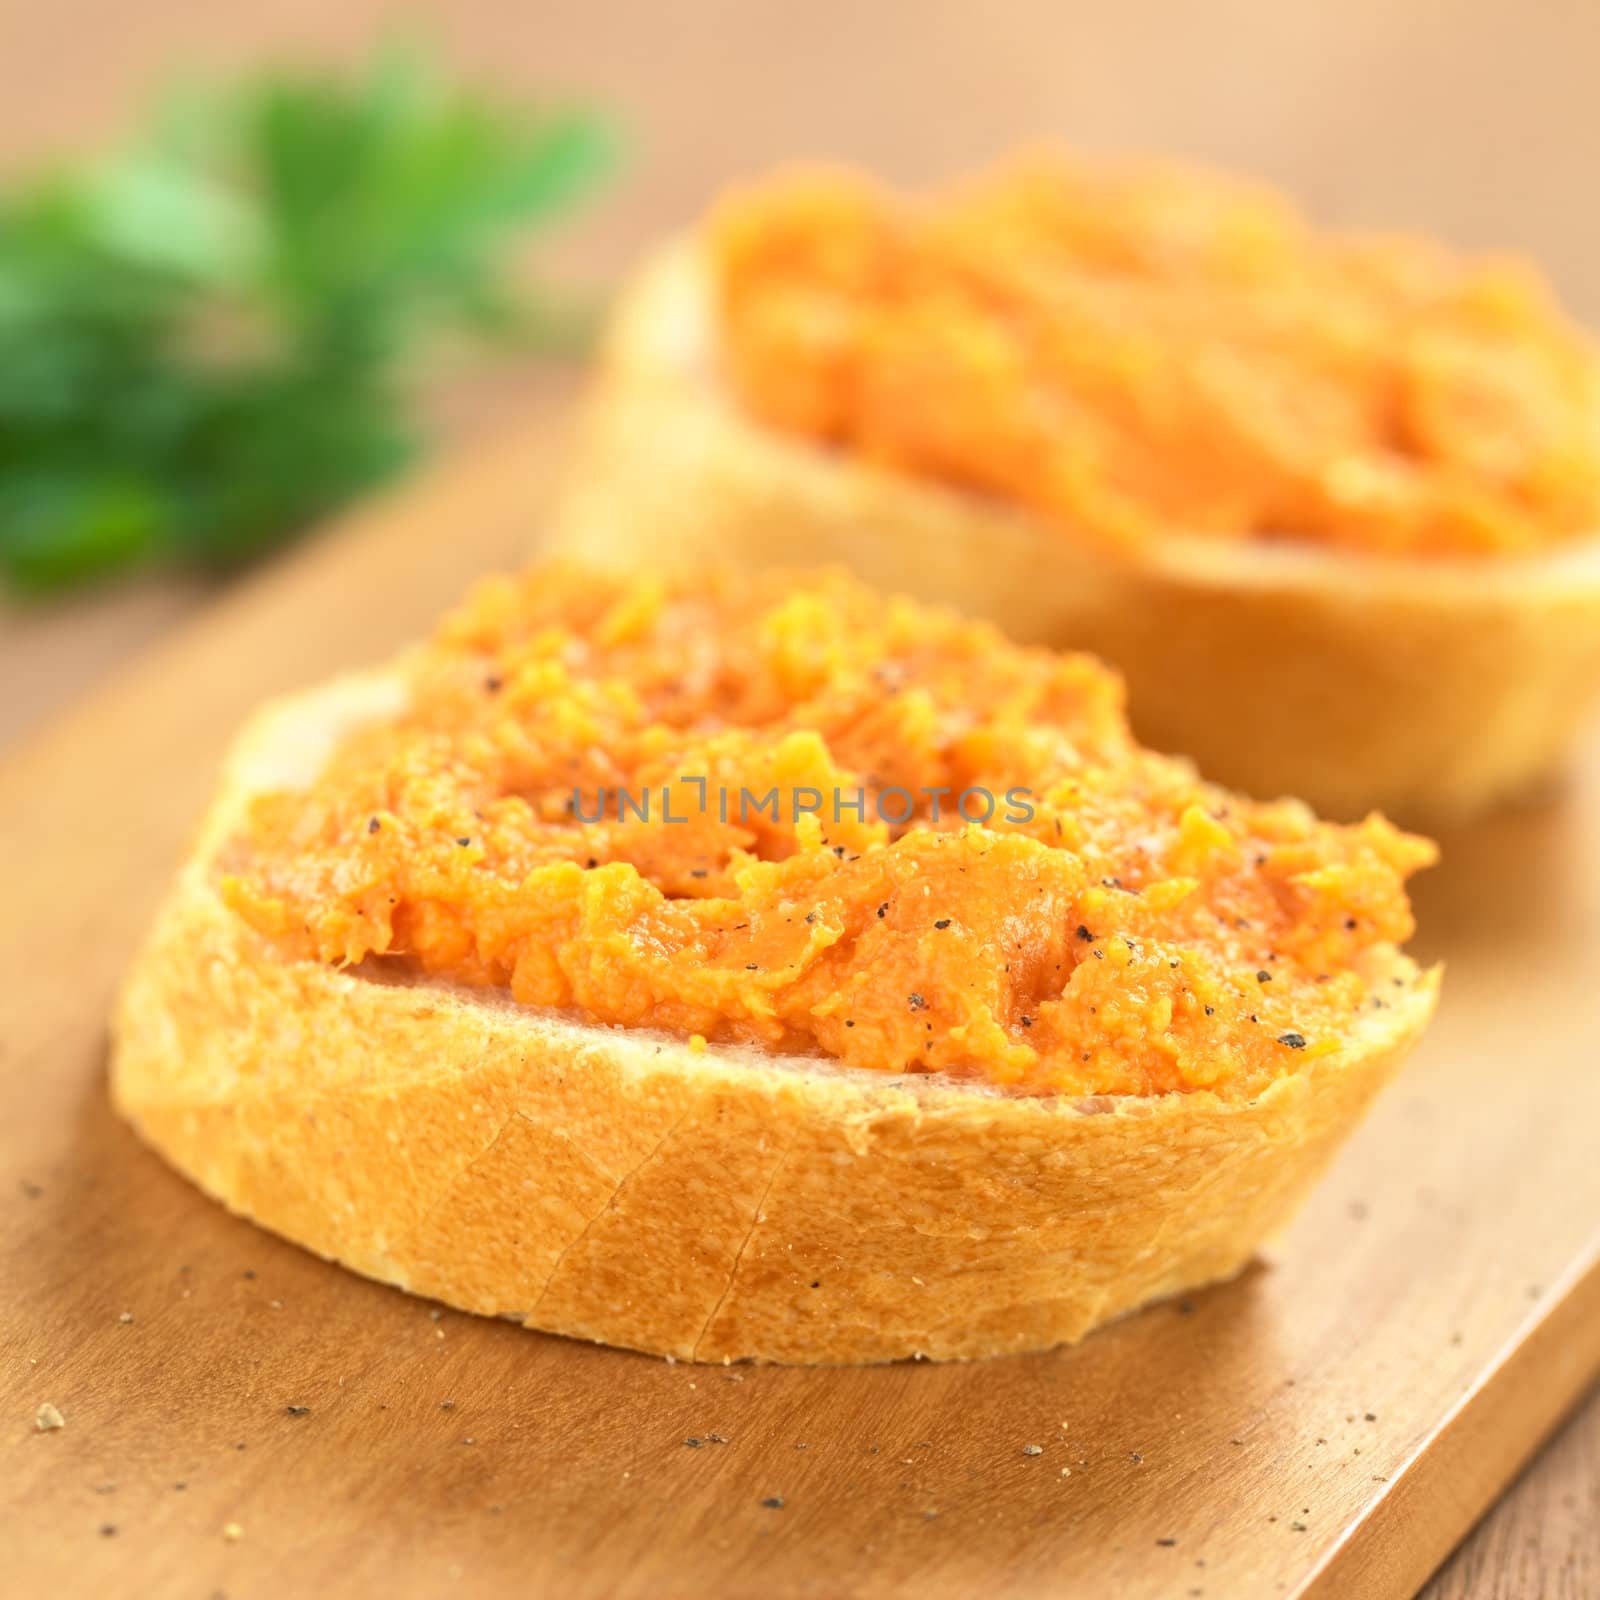 Sweet potato spread on baguette slice with freshly ground pepper on top on wooden board  (Selective Focus, Focus on the front of the spread) 